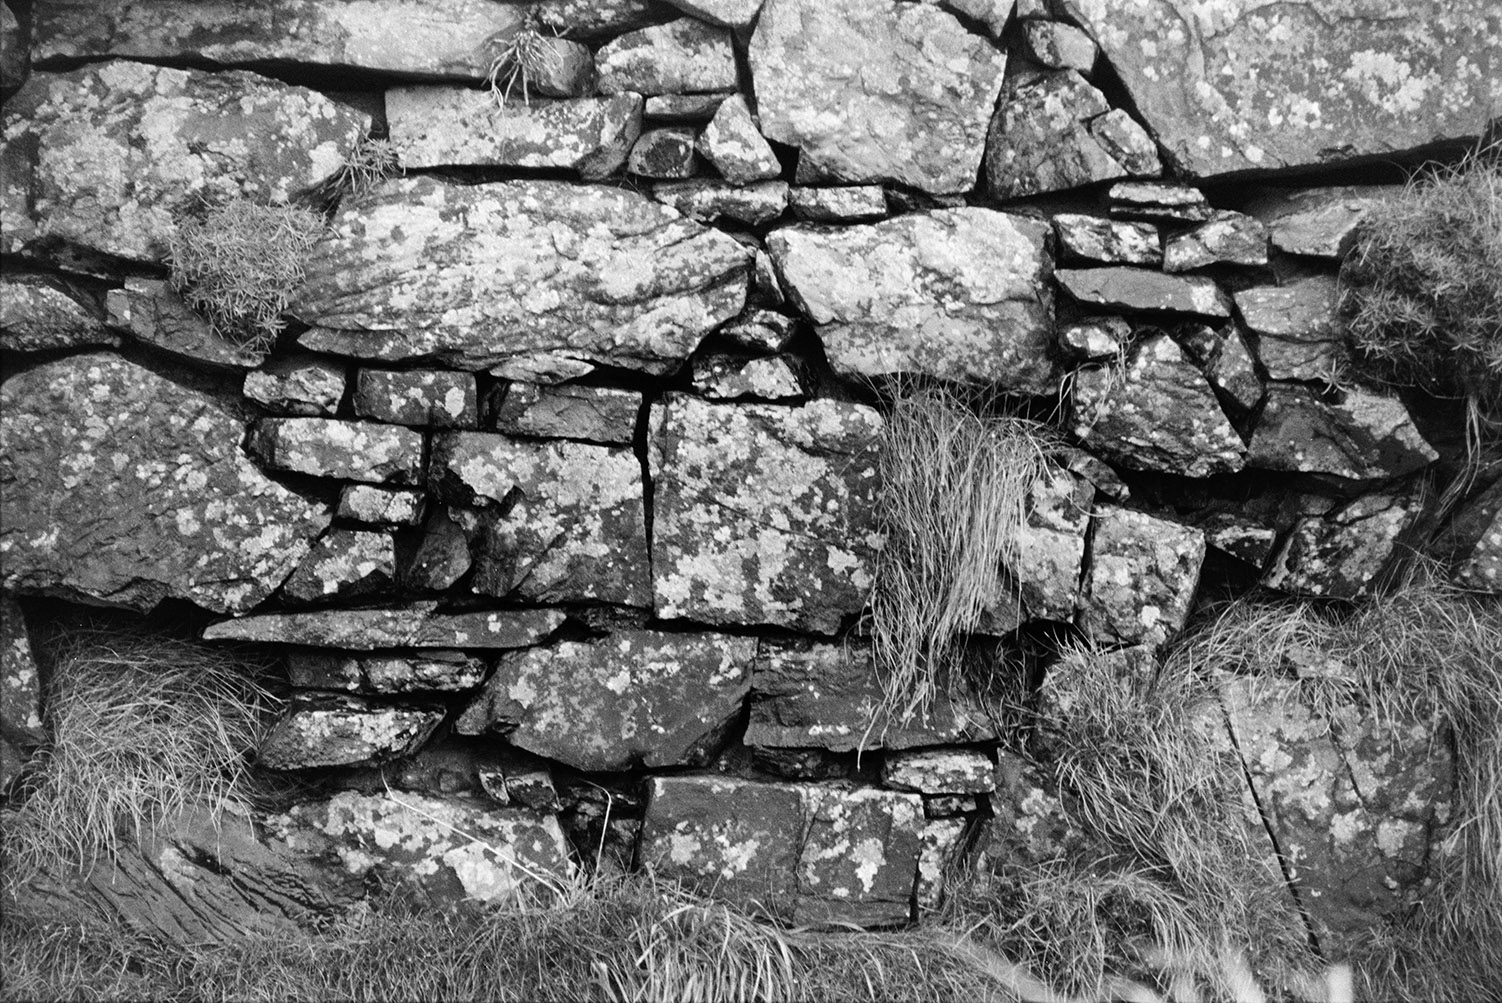 A dry stone wall with tufts of grass growing in it, at Hartland.